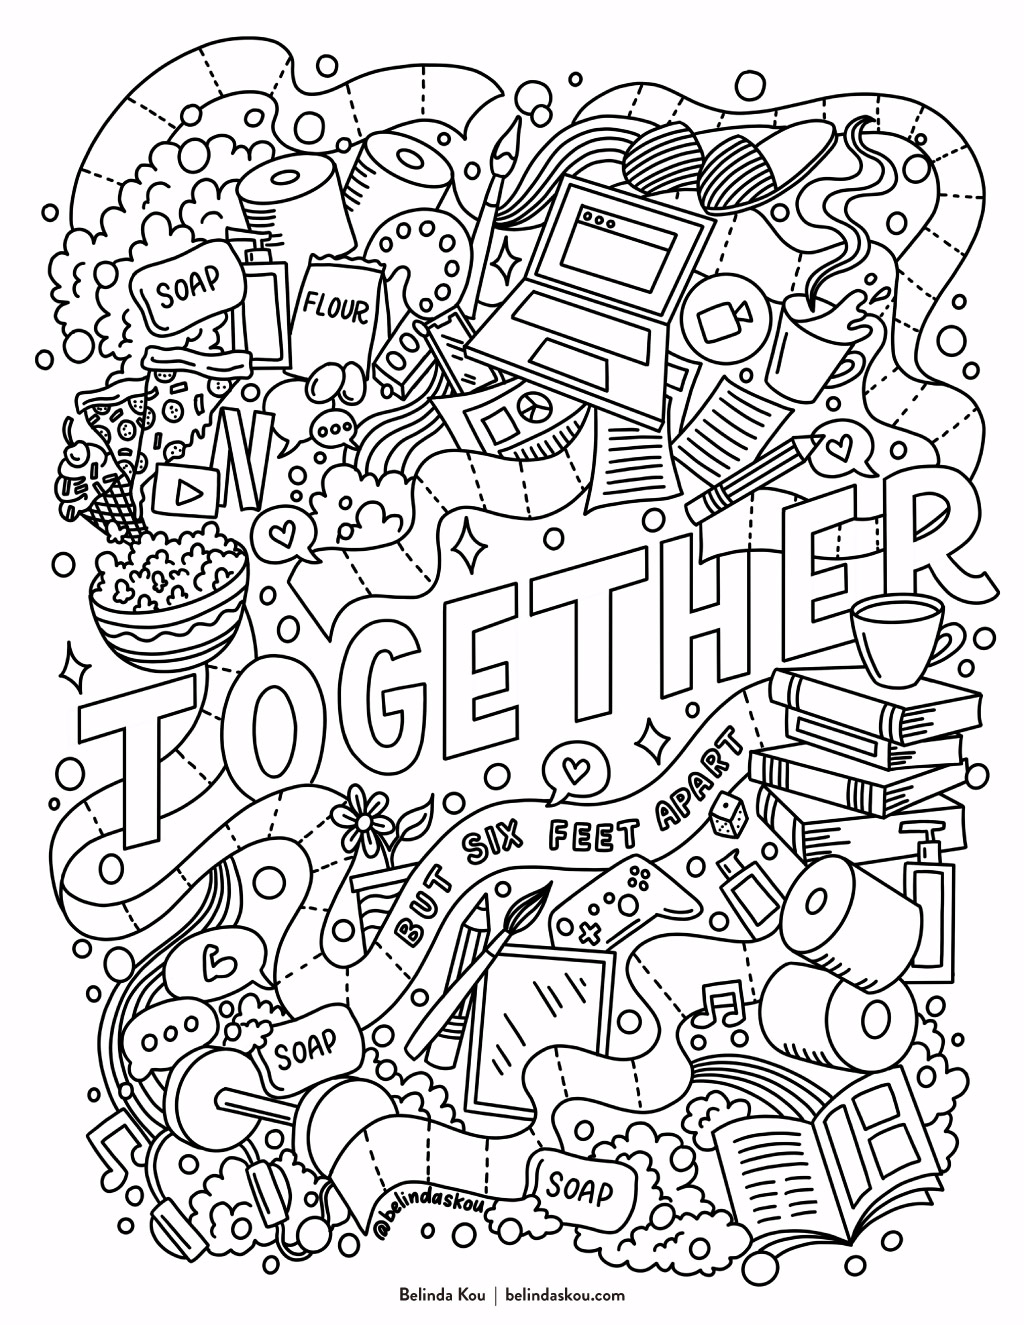 Free Quarantine Together Coloring Pages printable